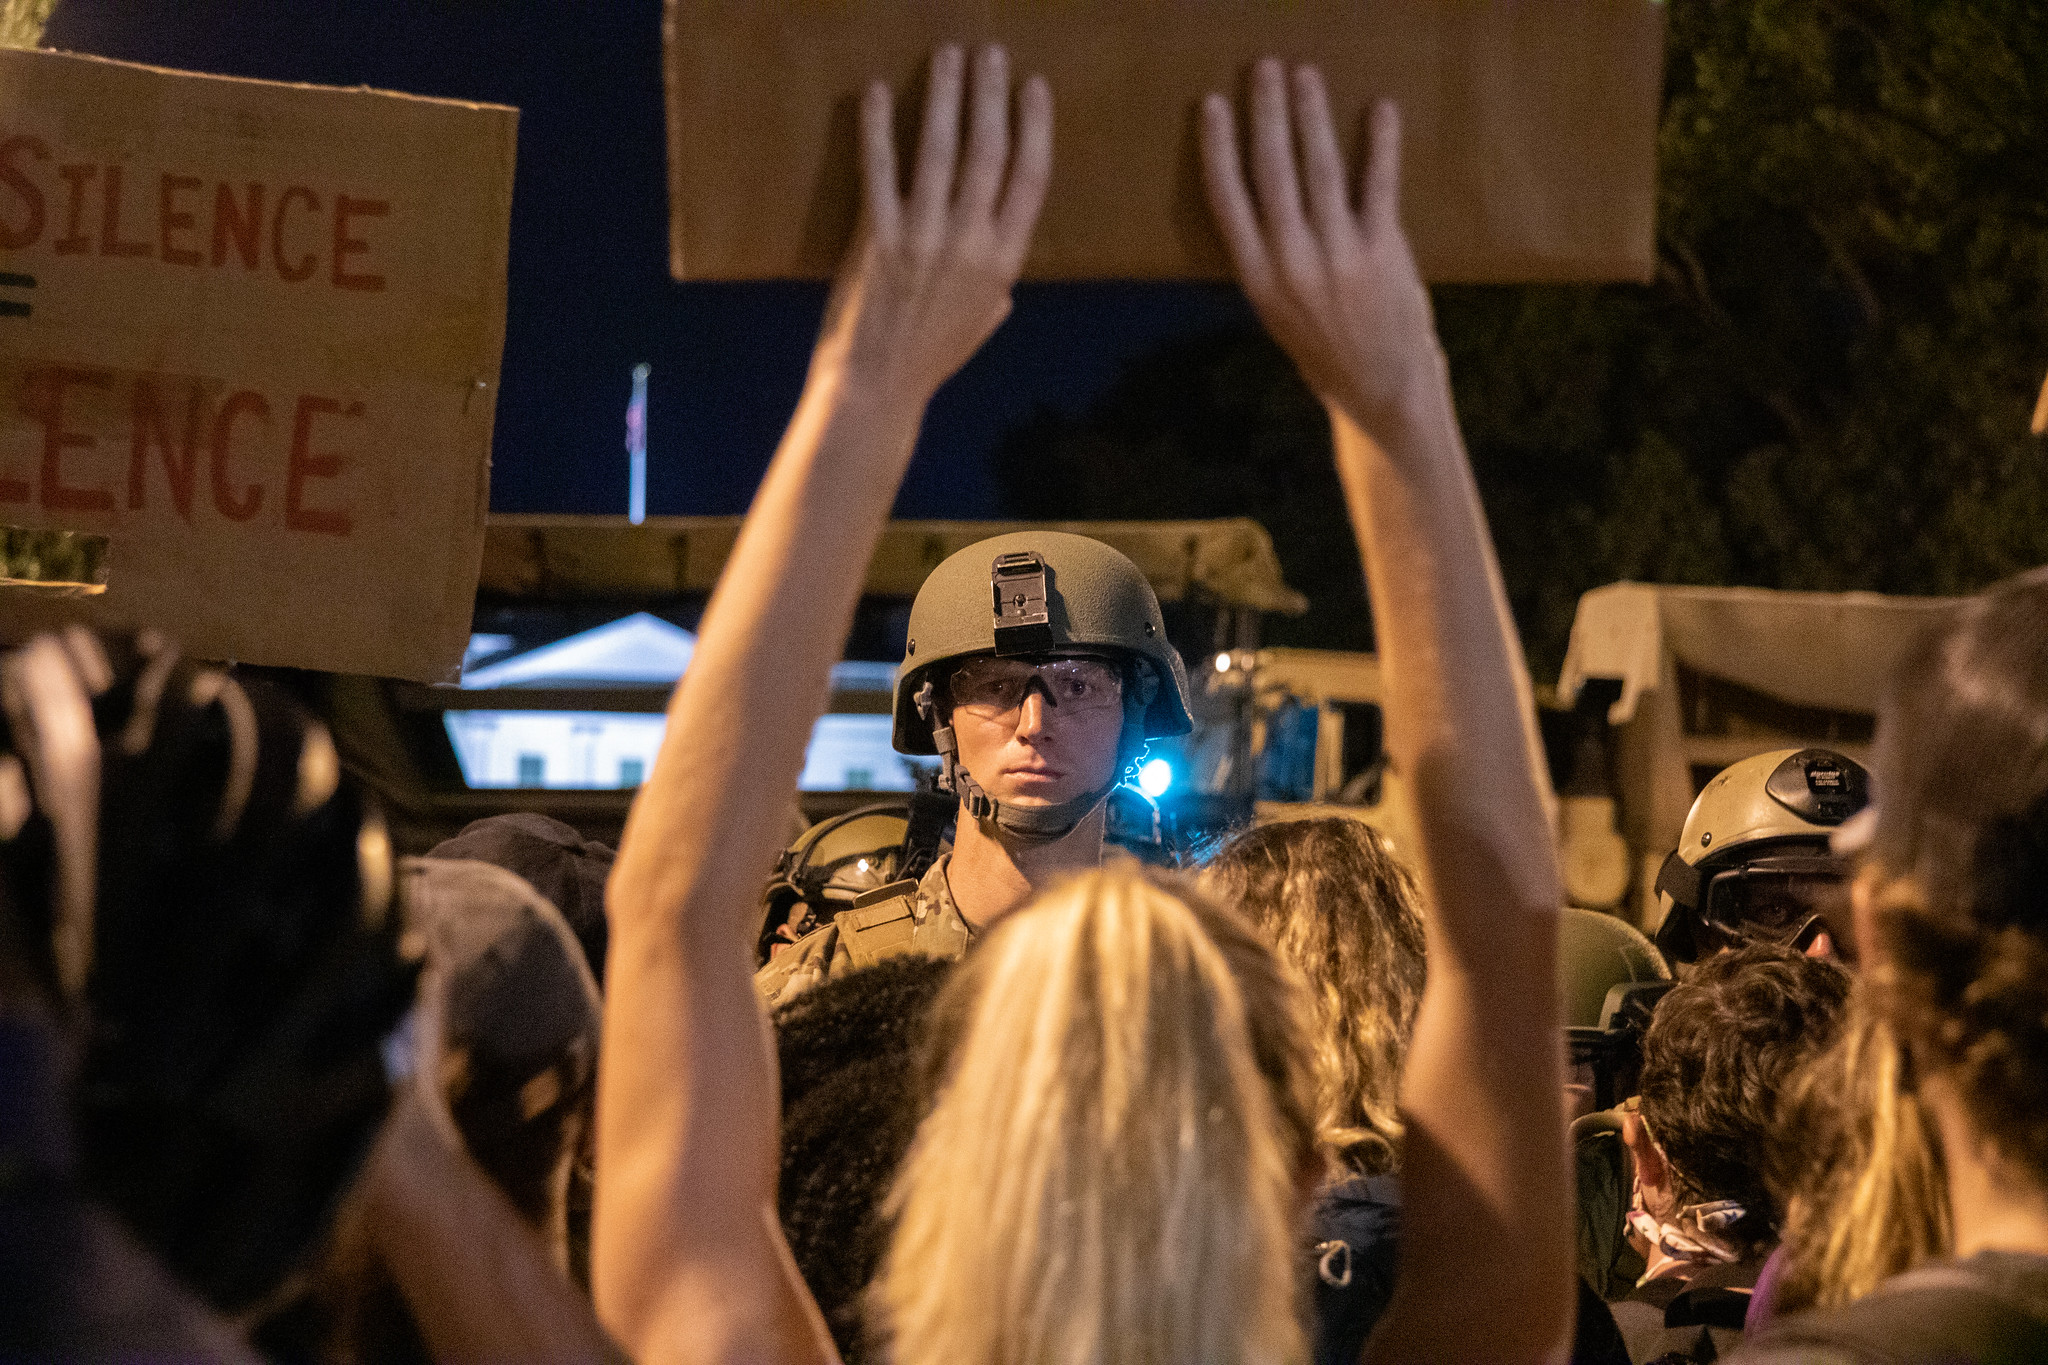 BLM Protests in DC - a member of the military is centered in the frame, standing in front of protesters